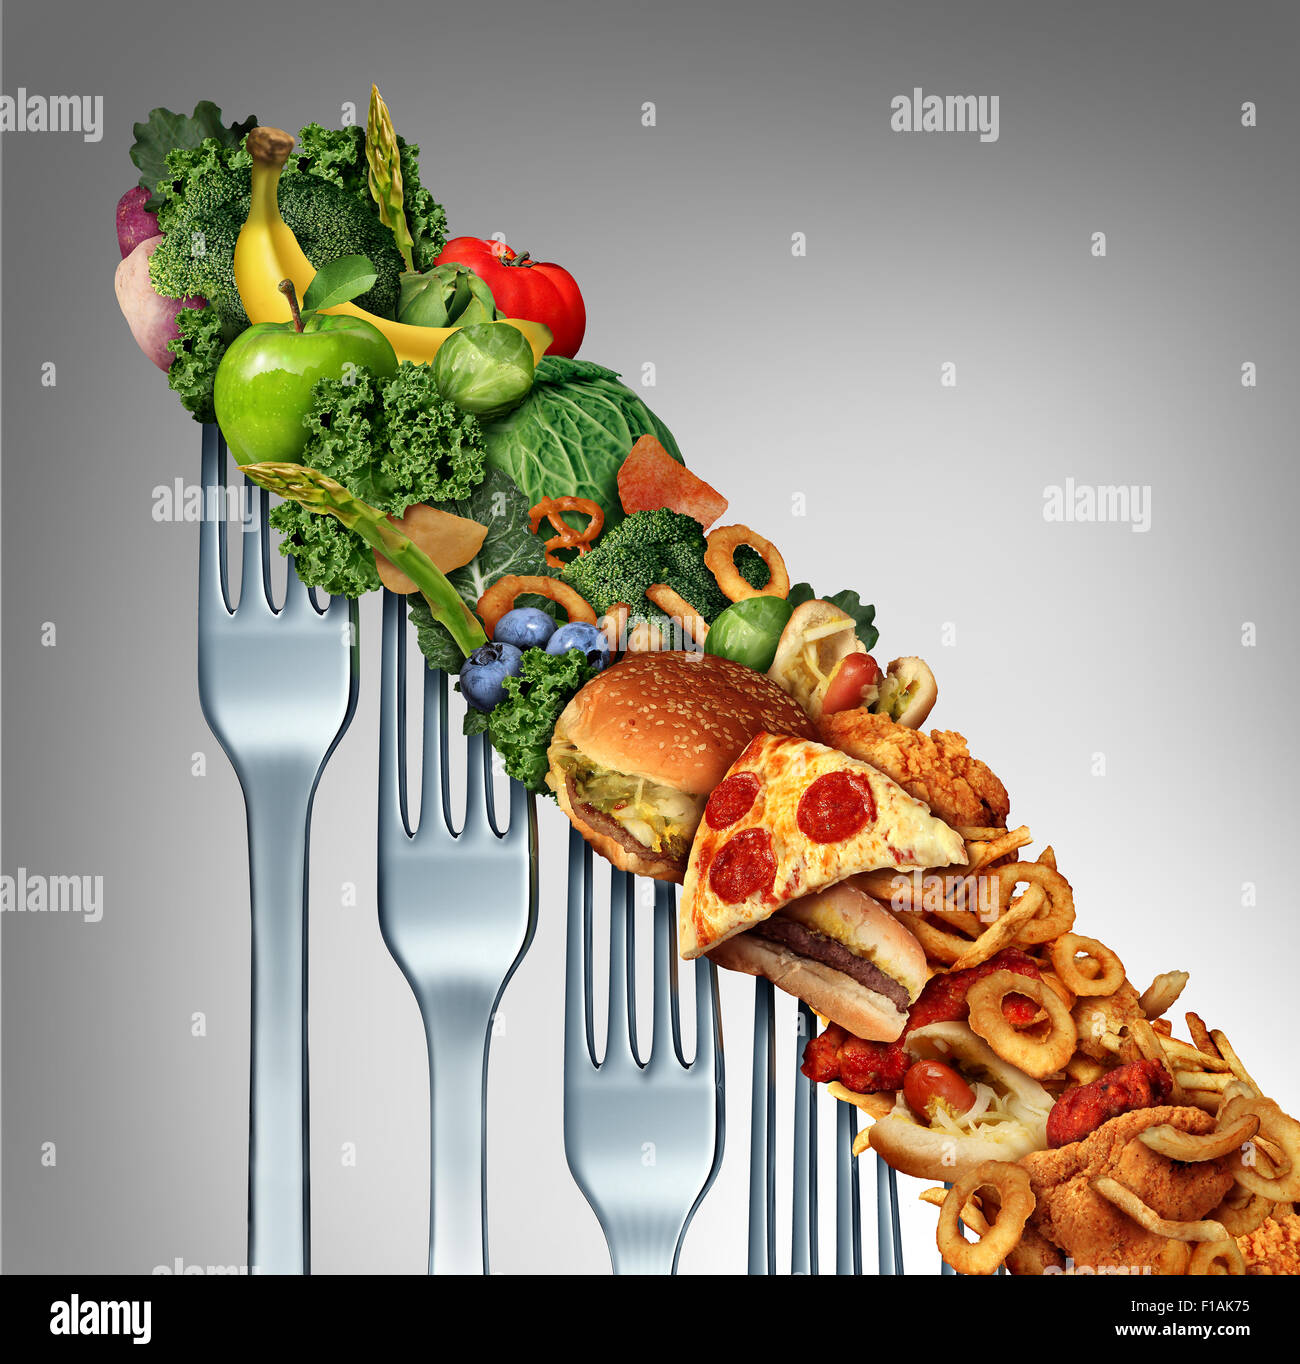 Diet relapse change as a healthy lifestyle slowly goes downward to greasy unhealthy fast food concept as a dieting quality decline symbol of returning to bad eating habits as a group of descending forks with meal items on them. Stock Photo